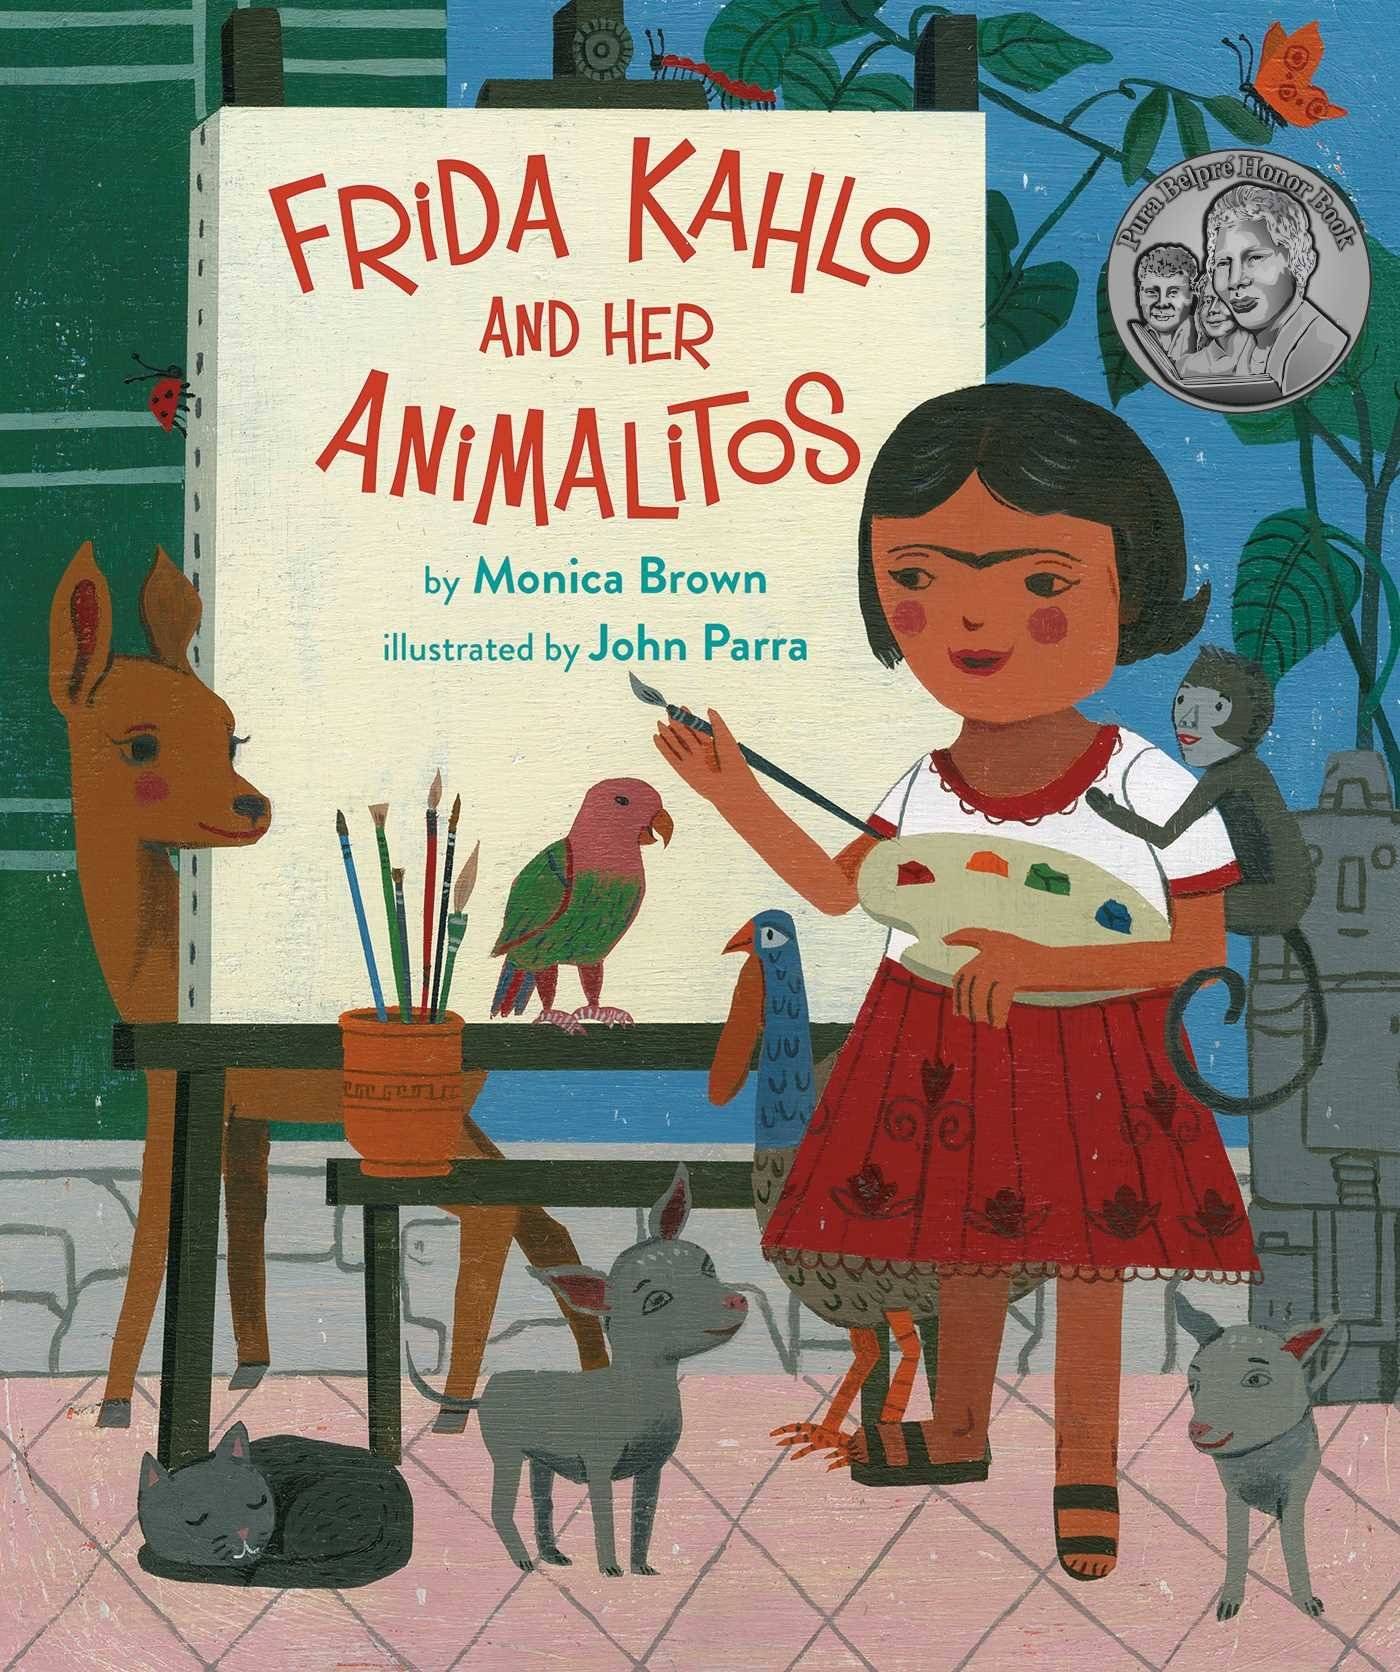 "Frida Kahlo and her animalitos" book cover with a small Frida painting at a canvas